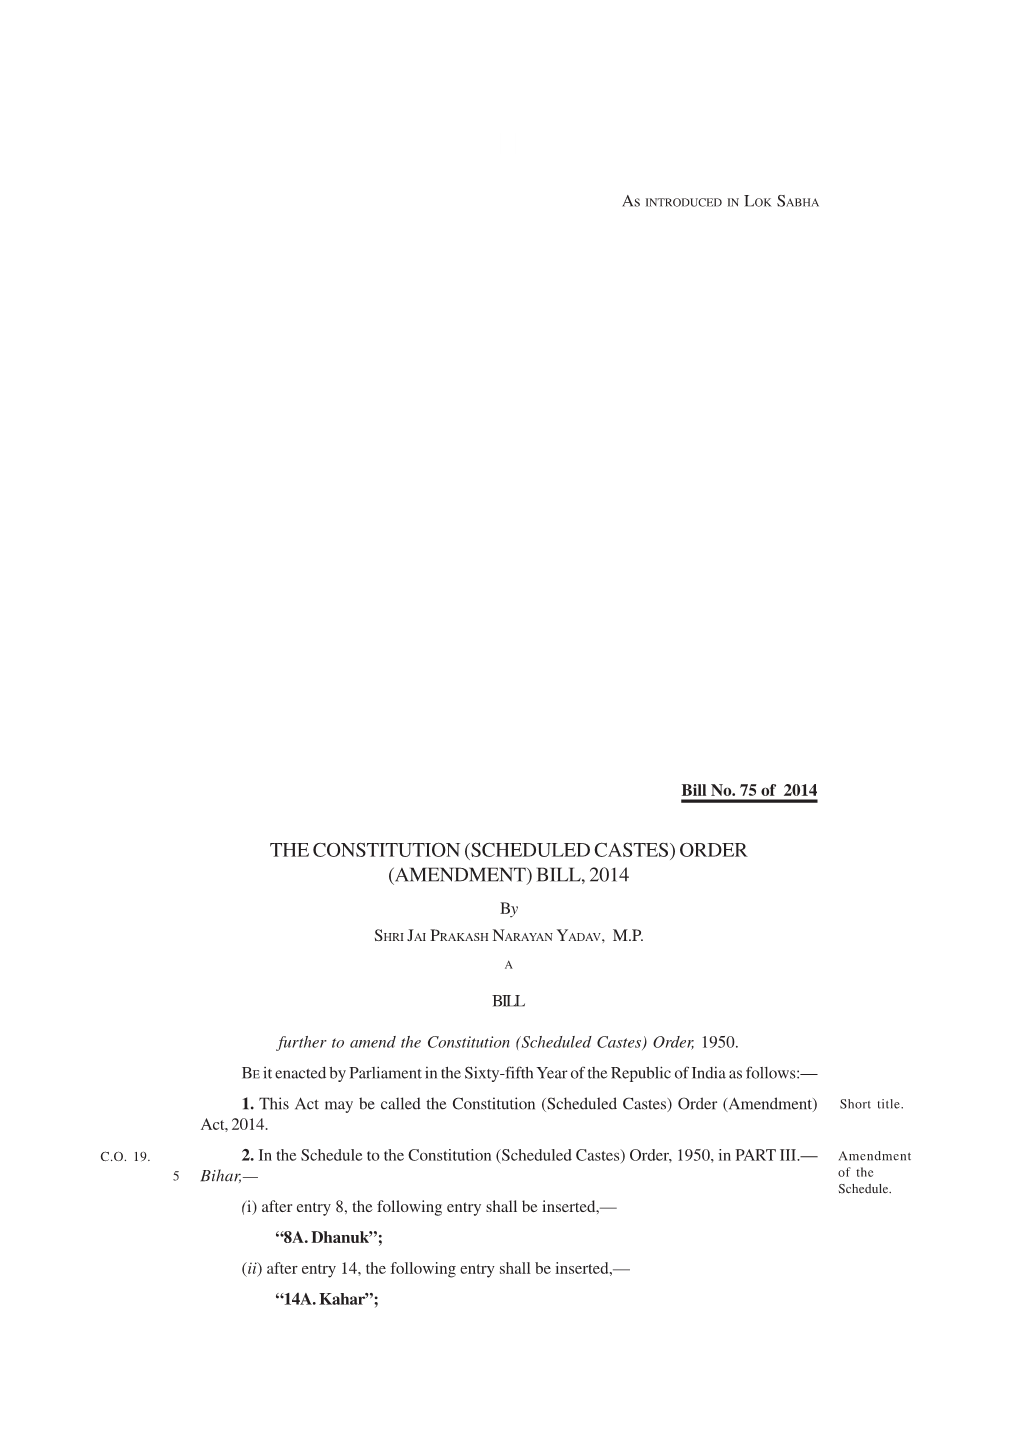 THE CONSTITUTION (SCHEDULED CASTES) ORDER (AMENDMENT) BILL, 2014 By